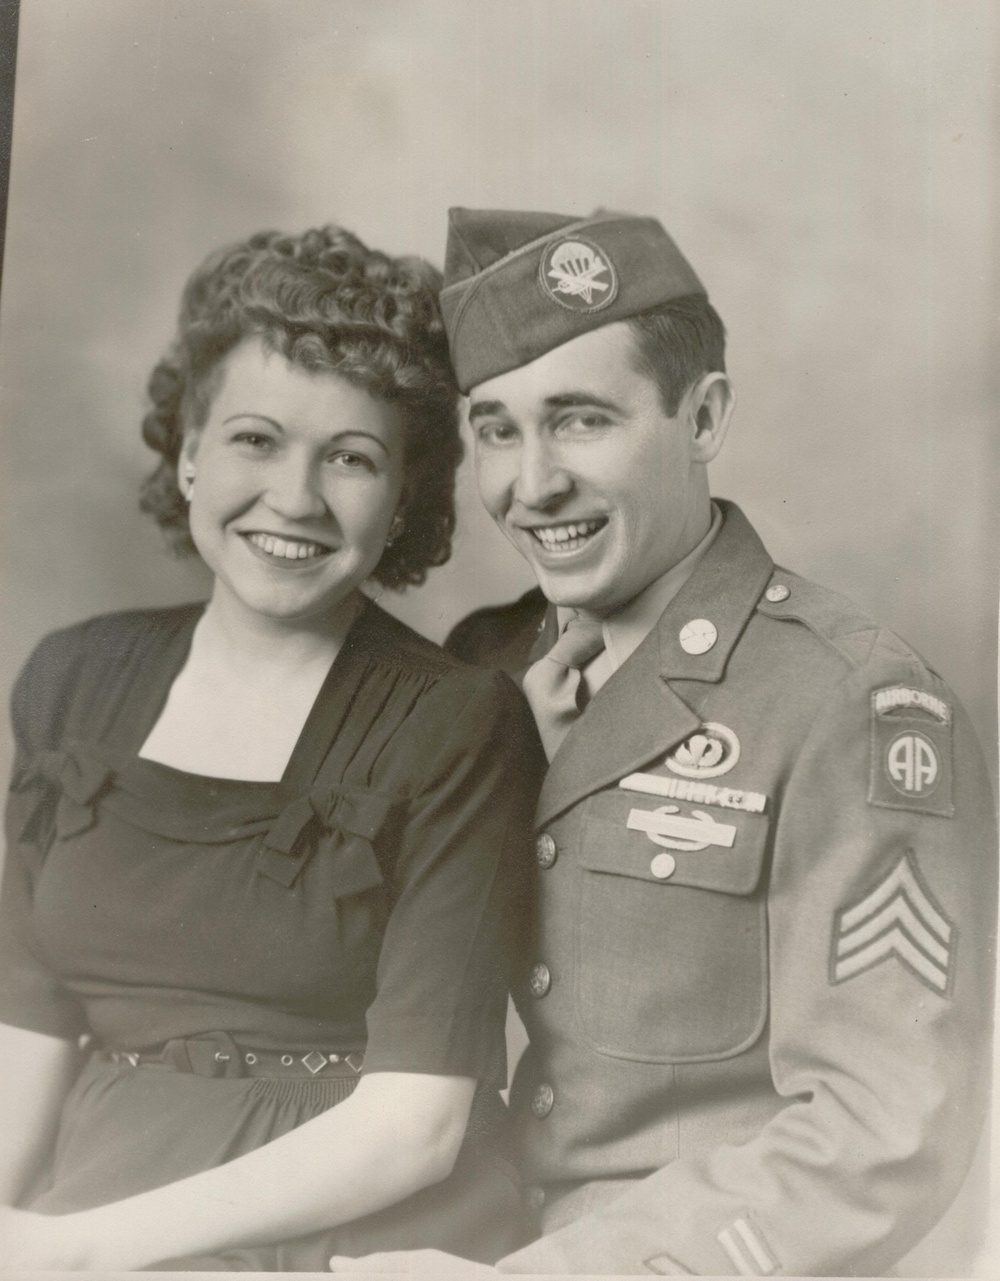 WWII Paratrooper, 99, Awarded Purple Heart and Bronze Star Medal